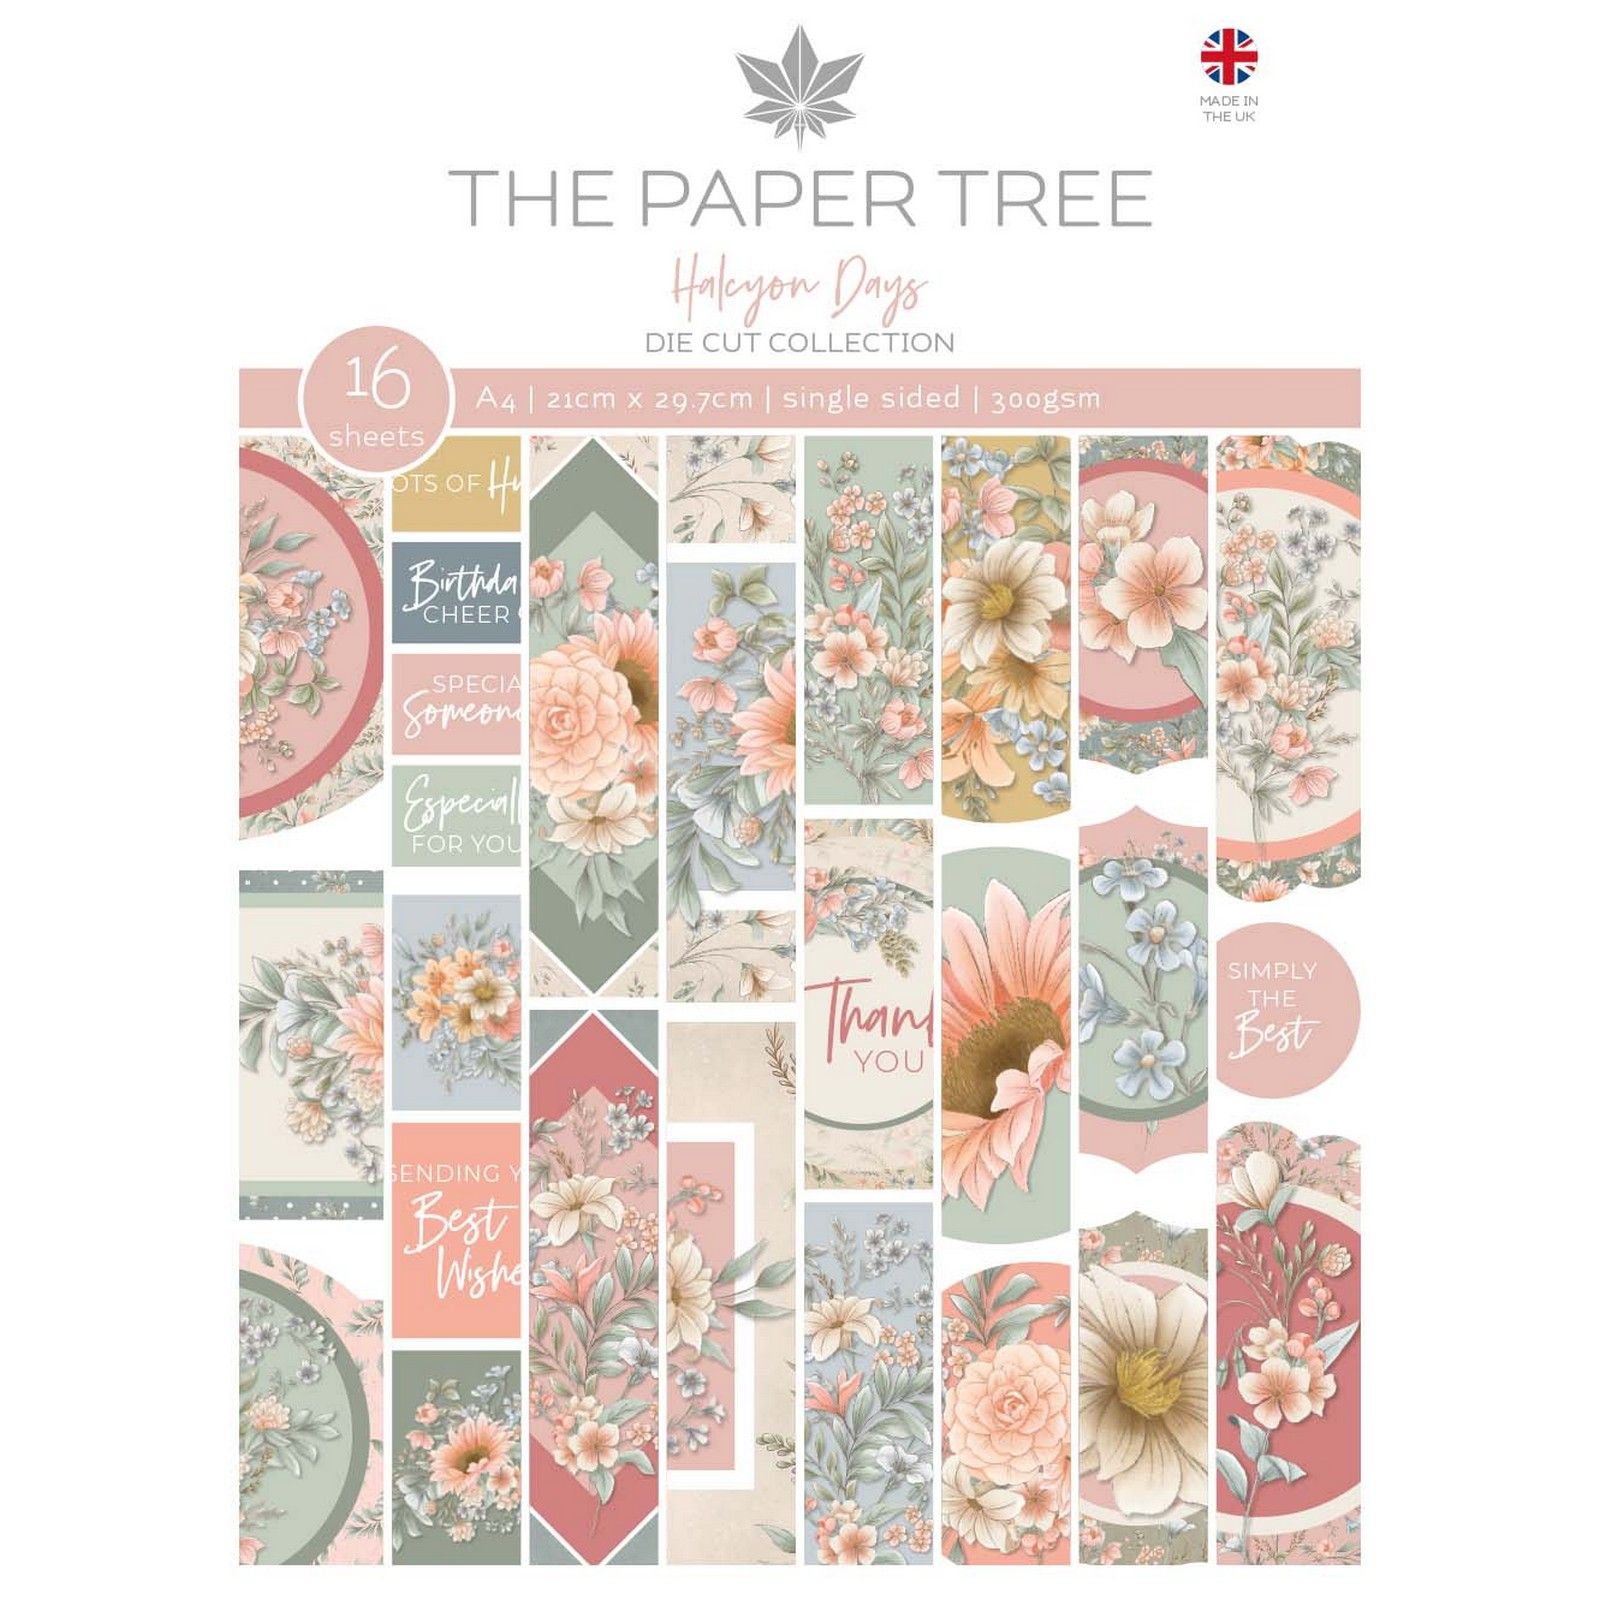 The Paper Tree • Halcyon days die cut collection